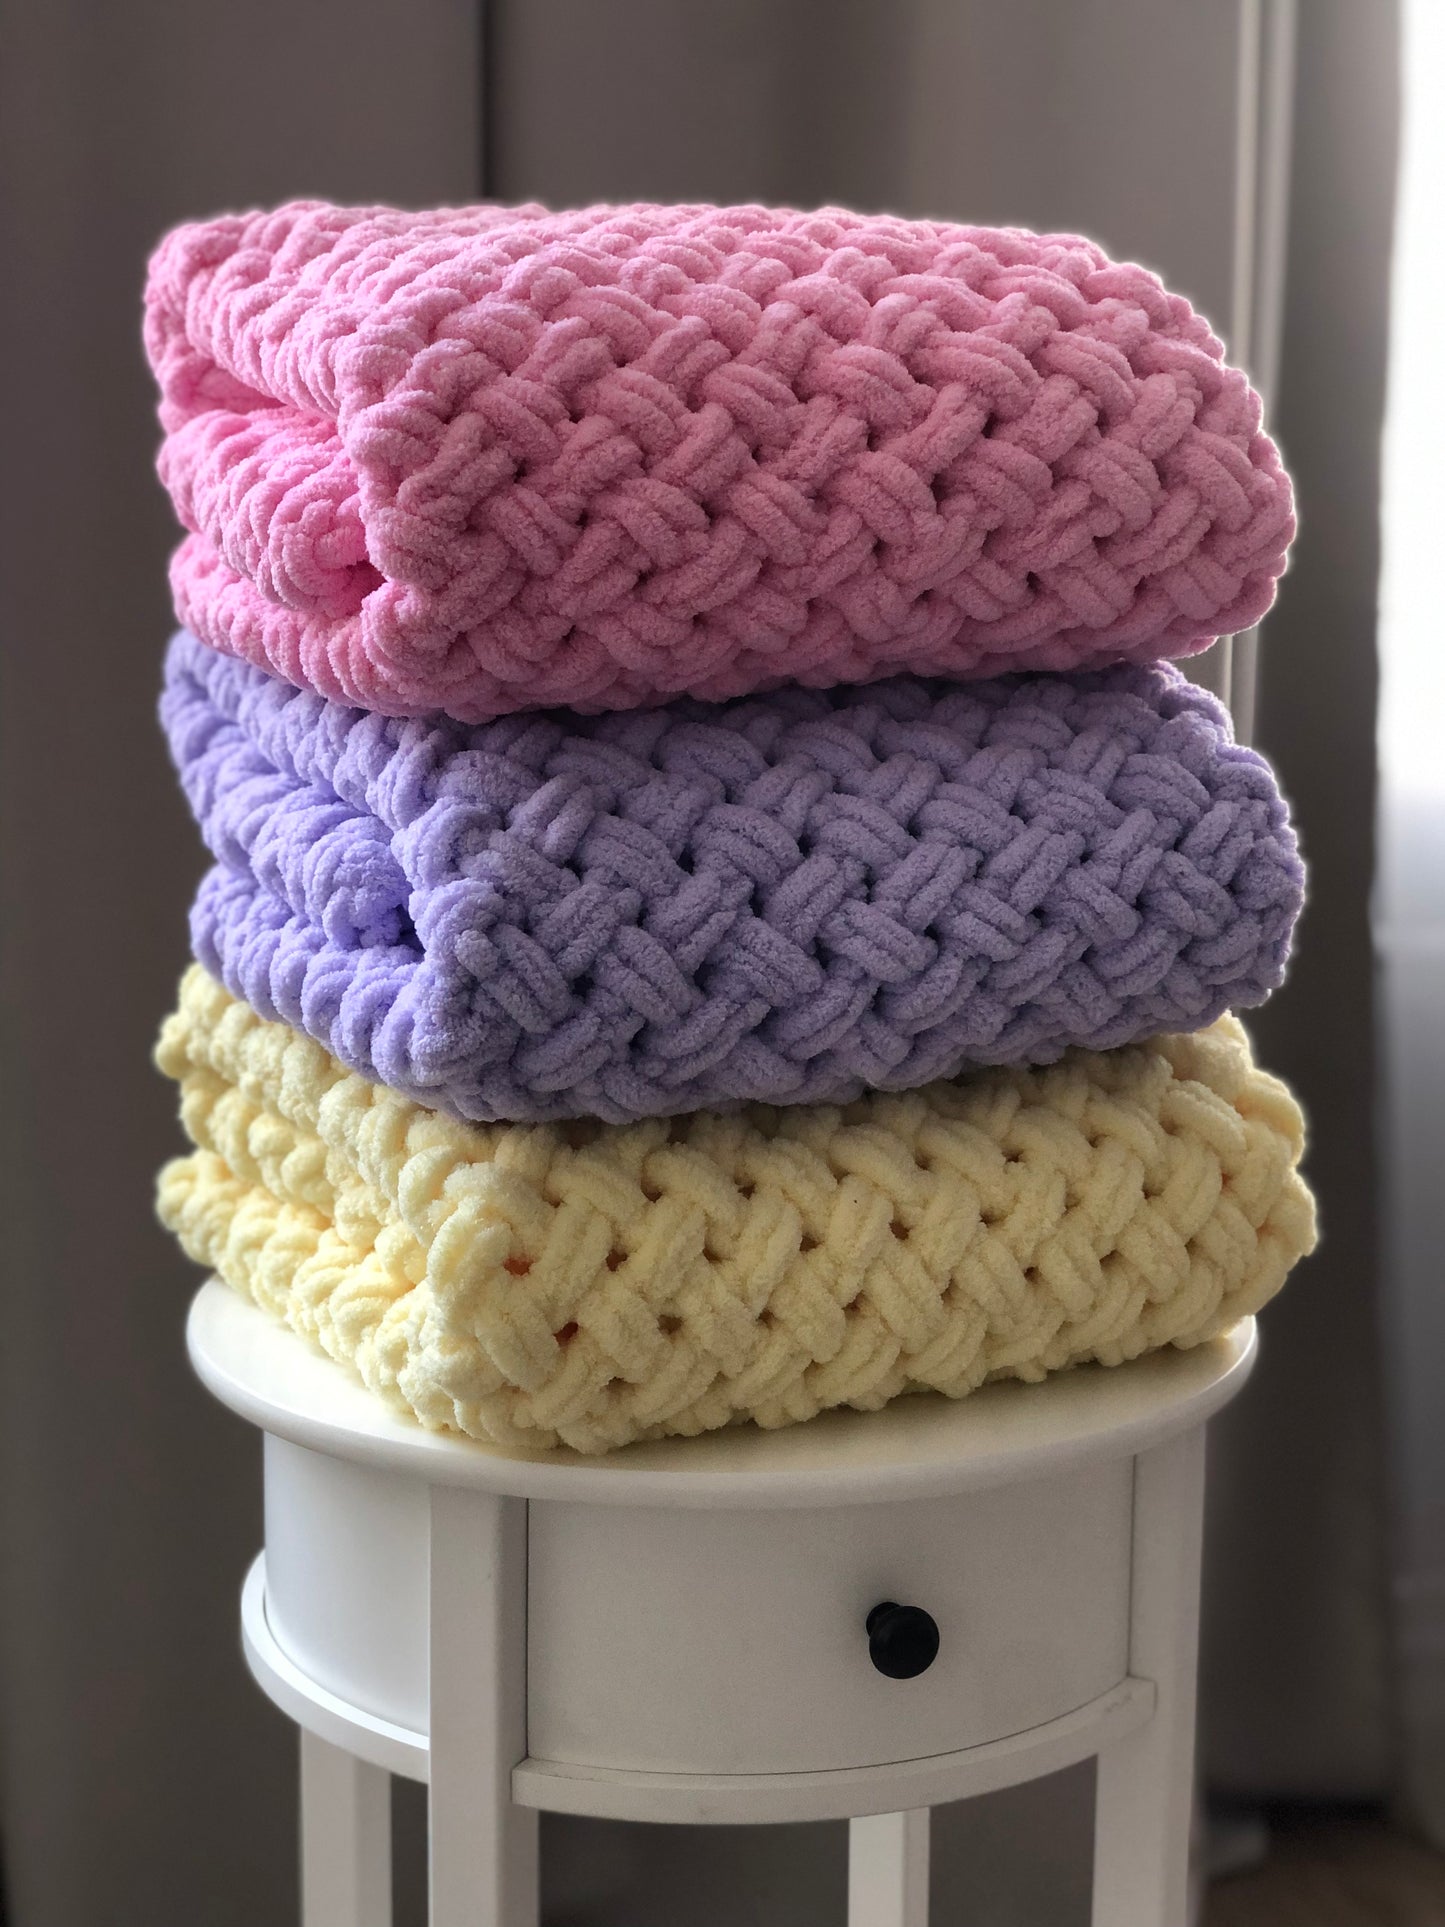 Knitted puffy blankets